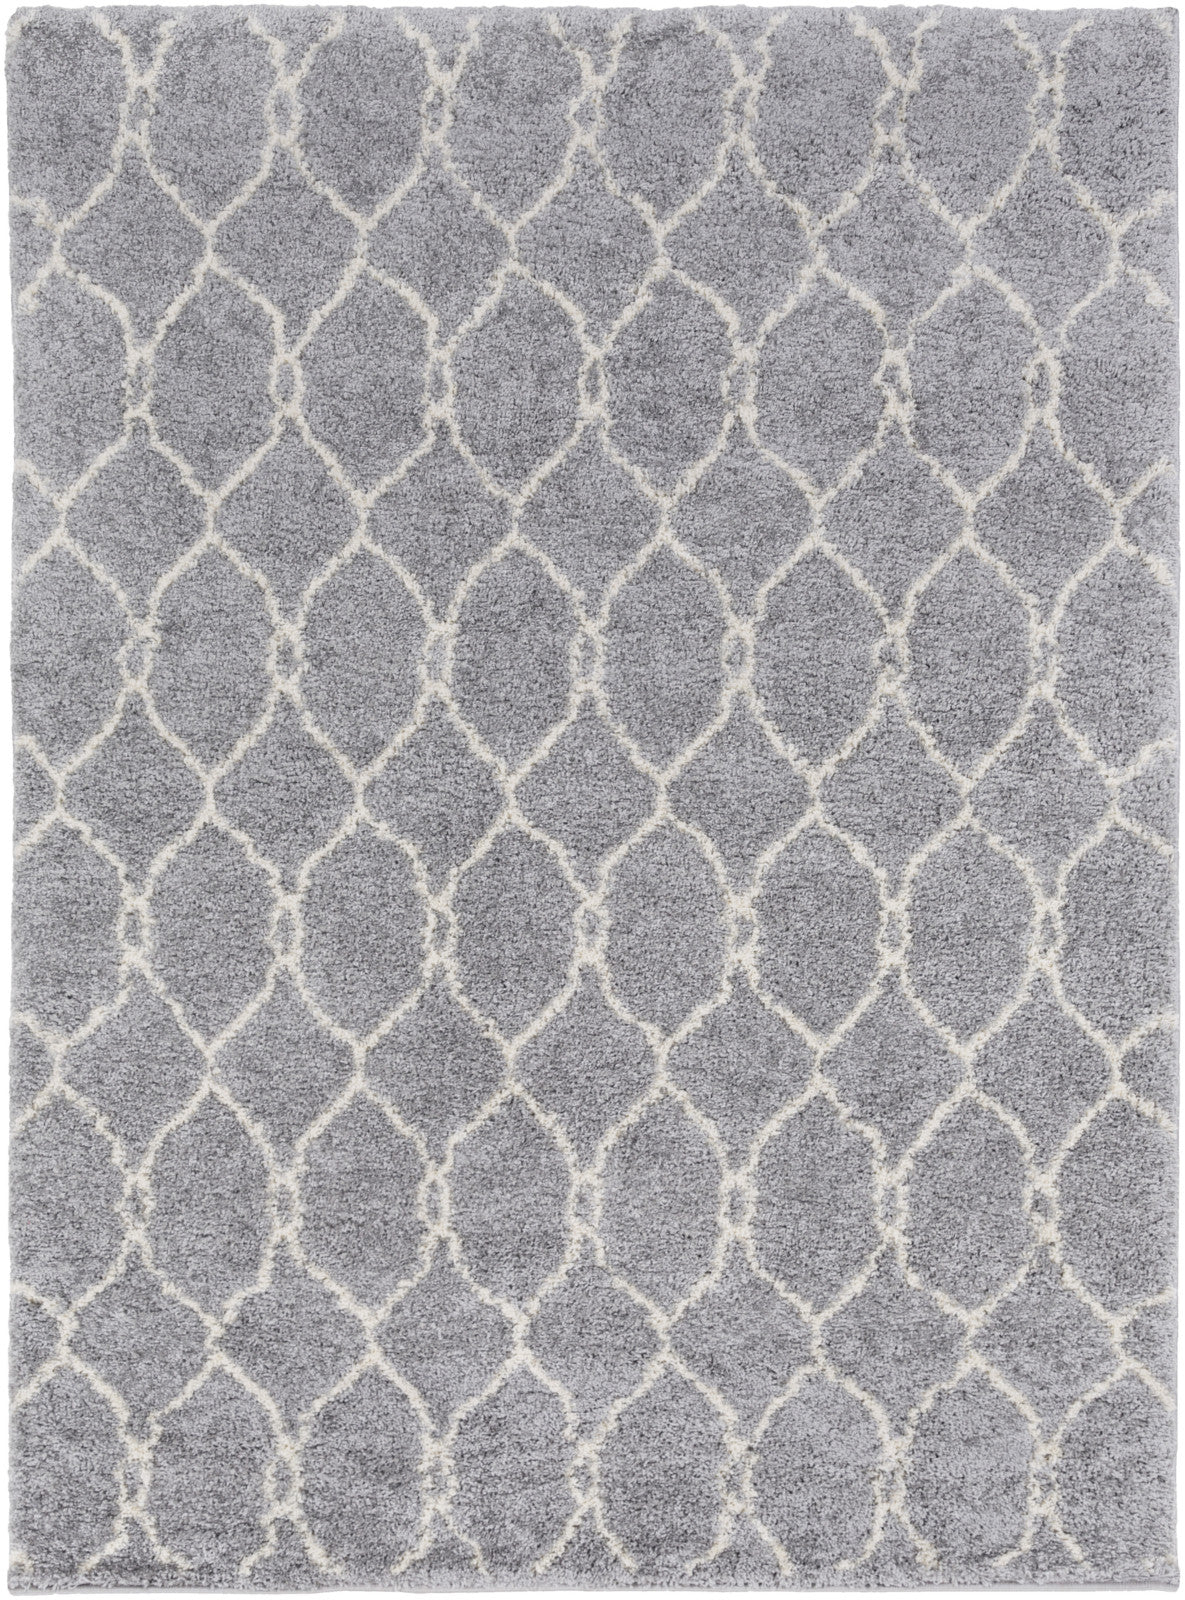 Surya Swift SWT-4024 Butter Area Rug by Candice Olson main image